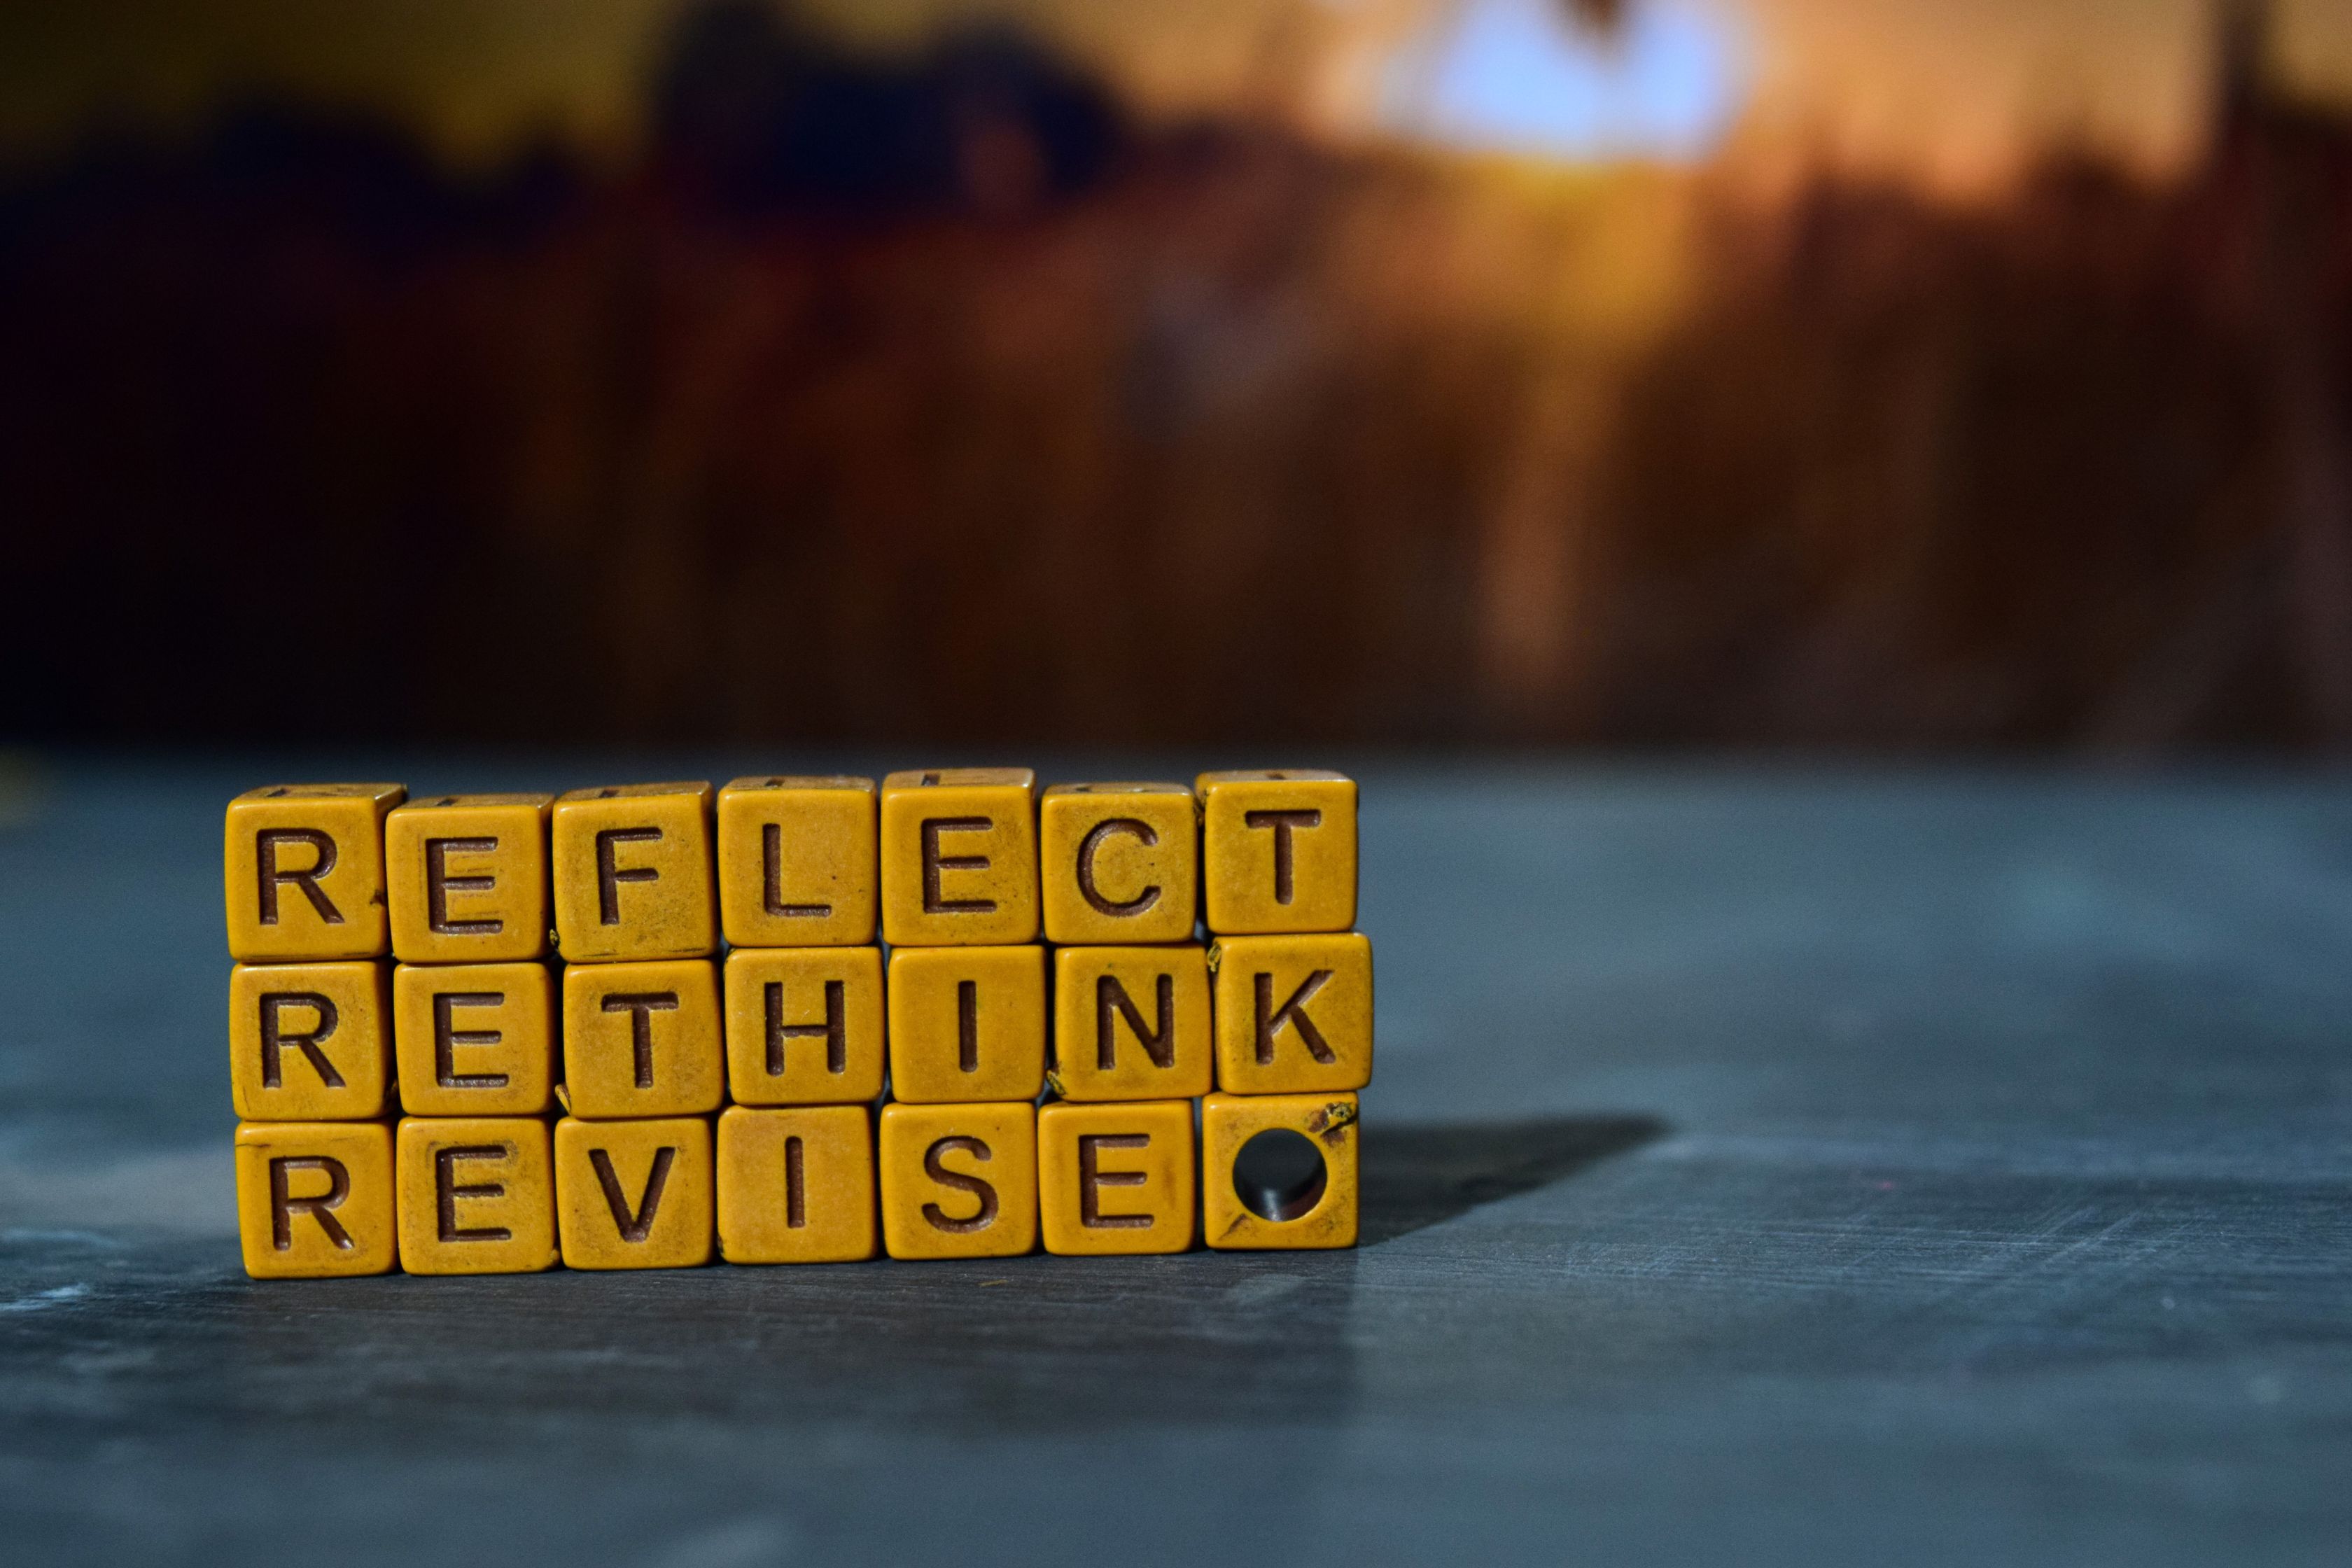 Image is words spelt out in square building blocks. The words sit on top of each other and read: Reflect, Rethink, Revise. The image is trying to convey reflecting on your 2023 email campaigns and planning for 2024